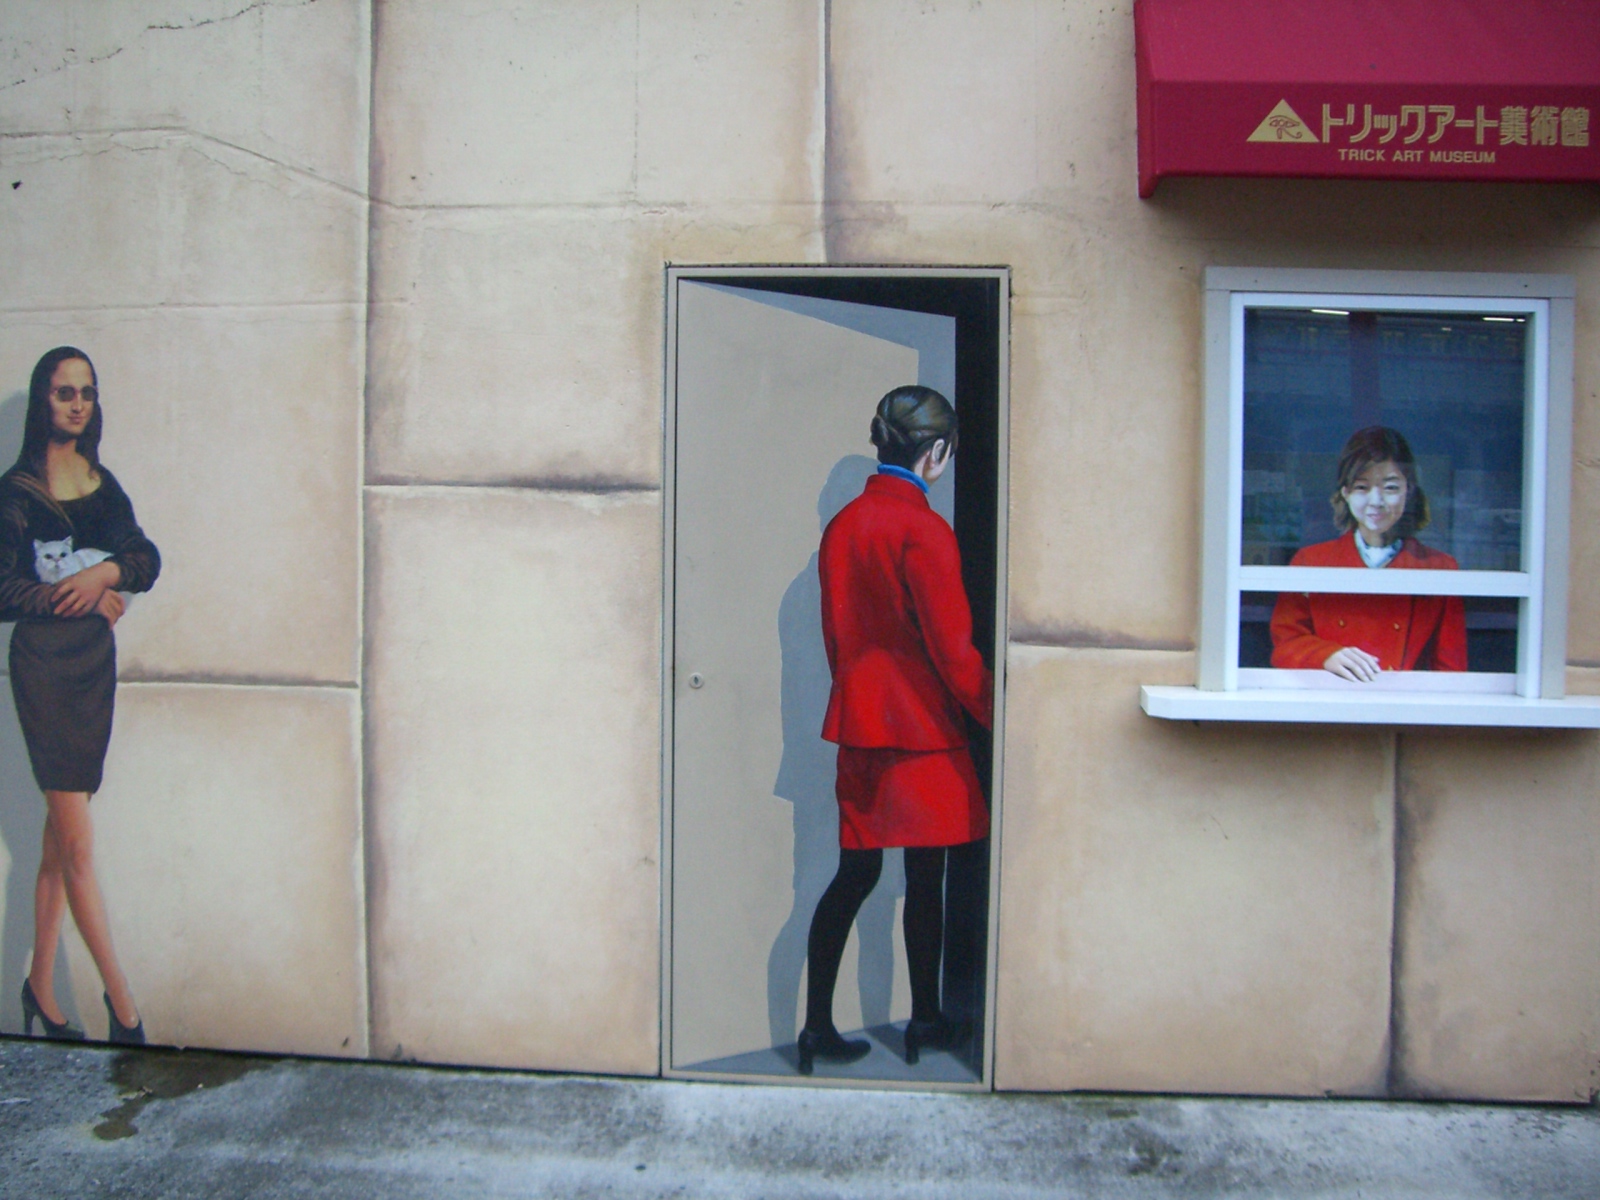 a mural depicting people wearing red and black clothing